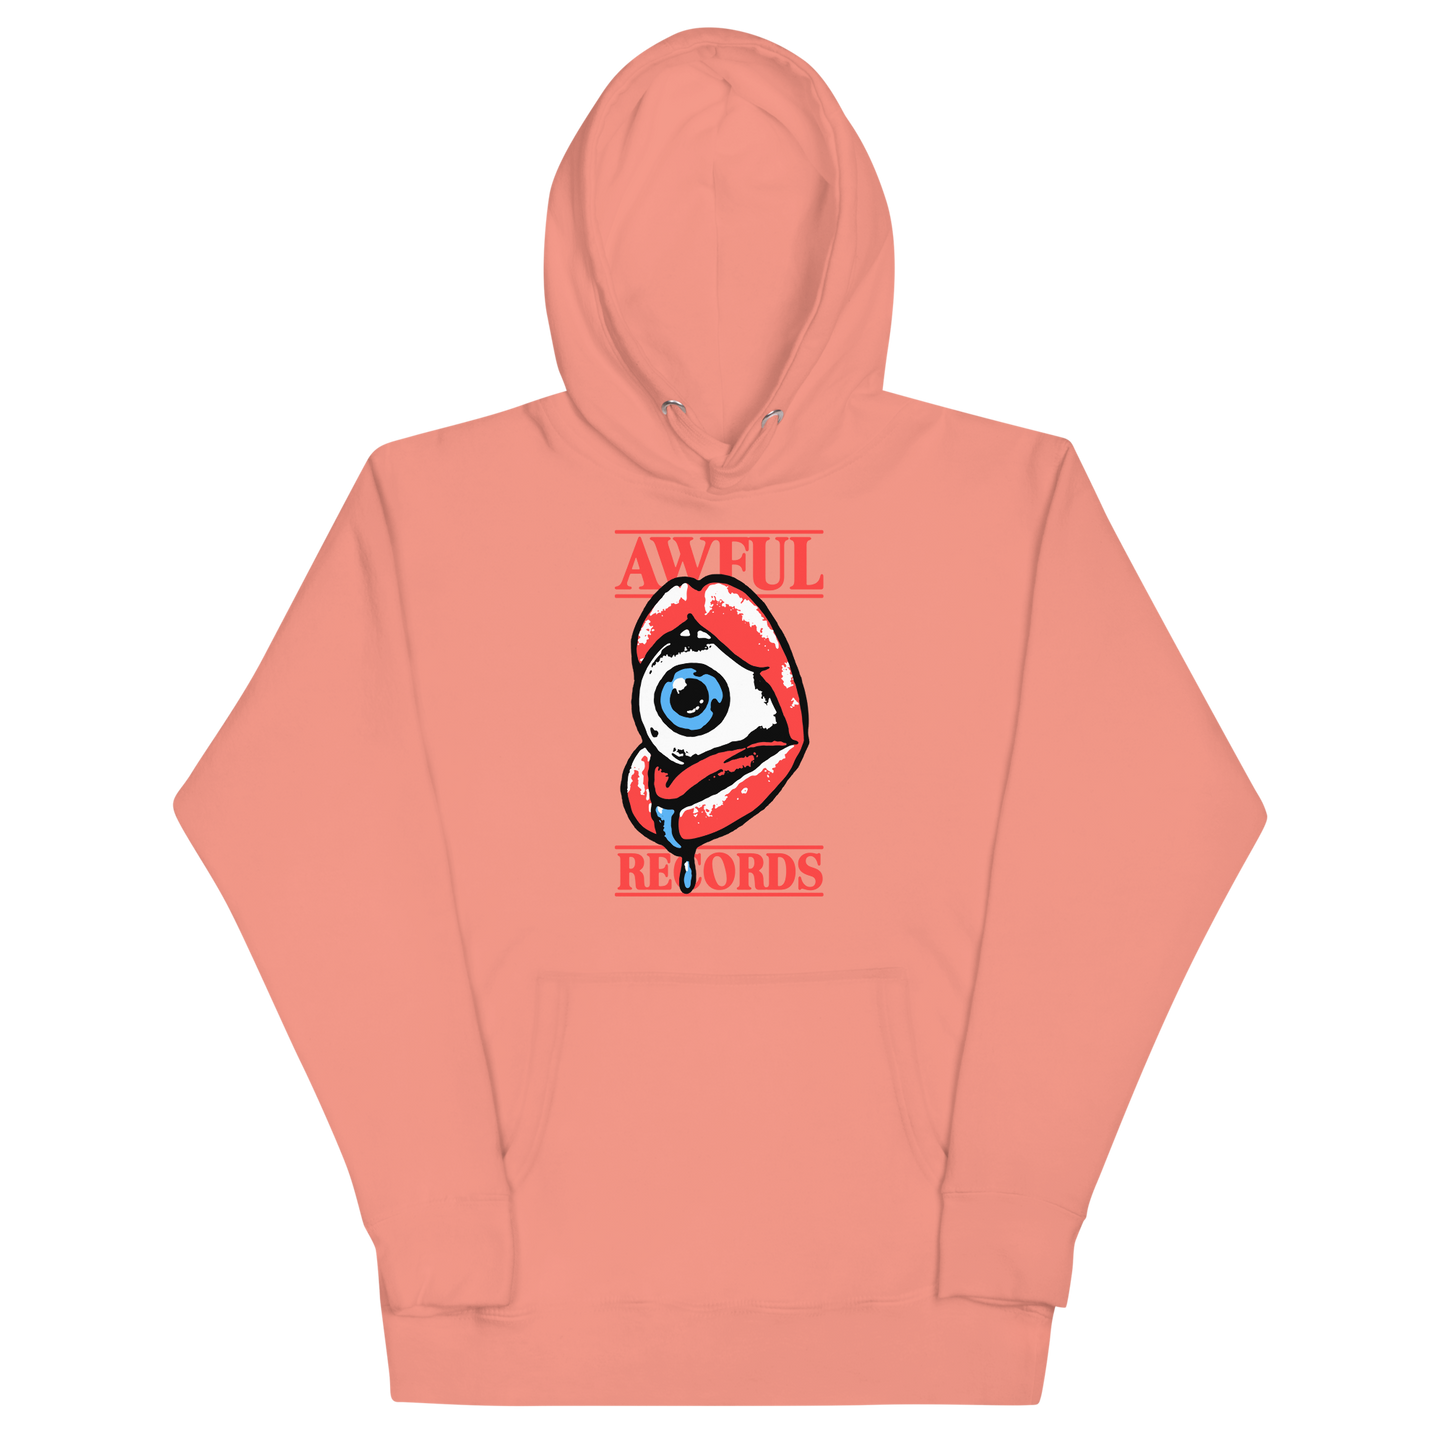 Classic Awful Records Hoodie (Dusty Rose)